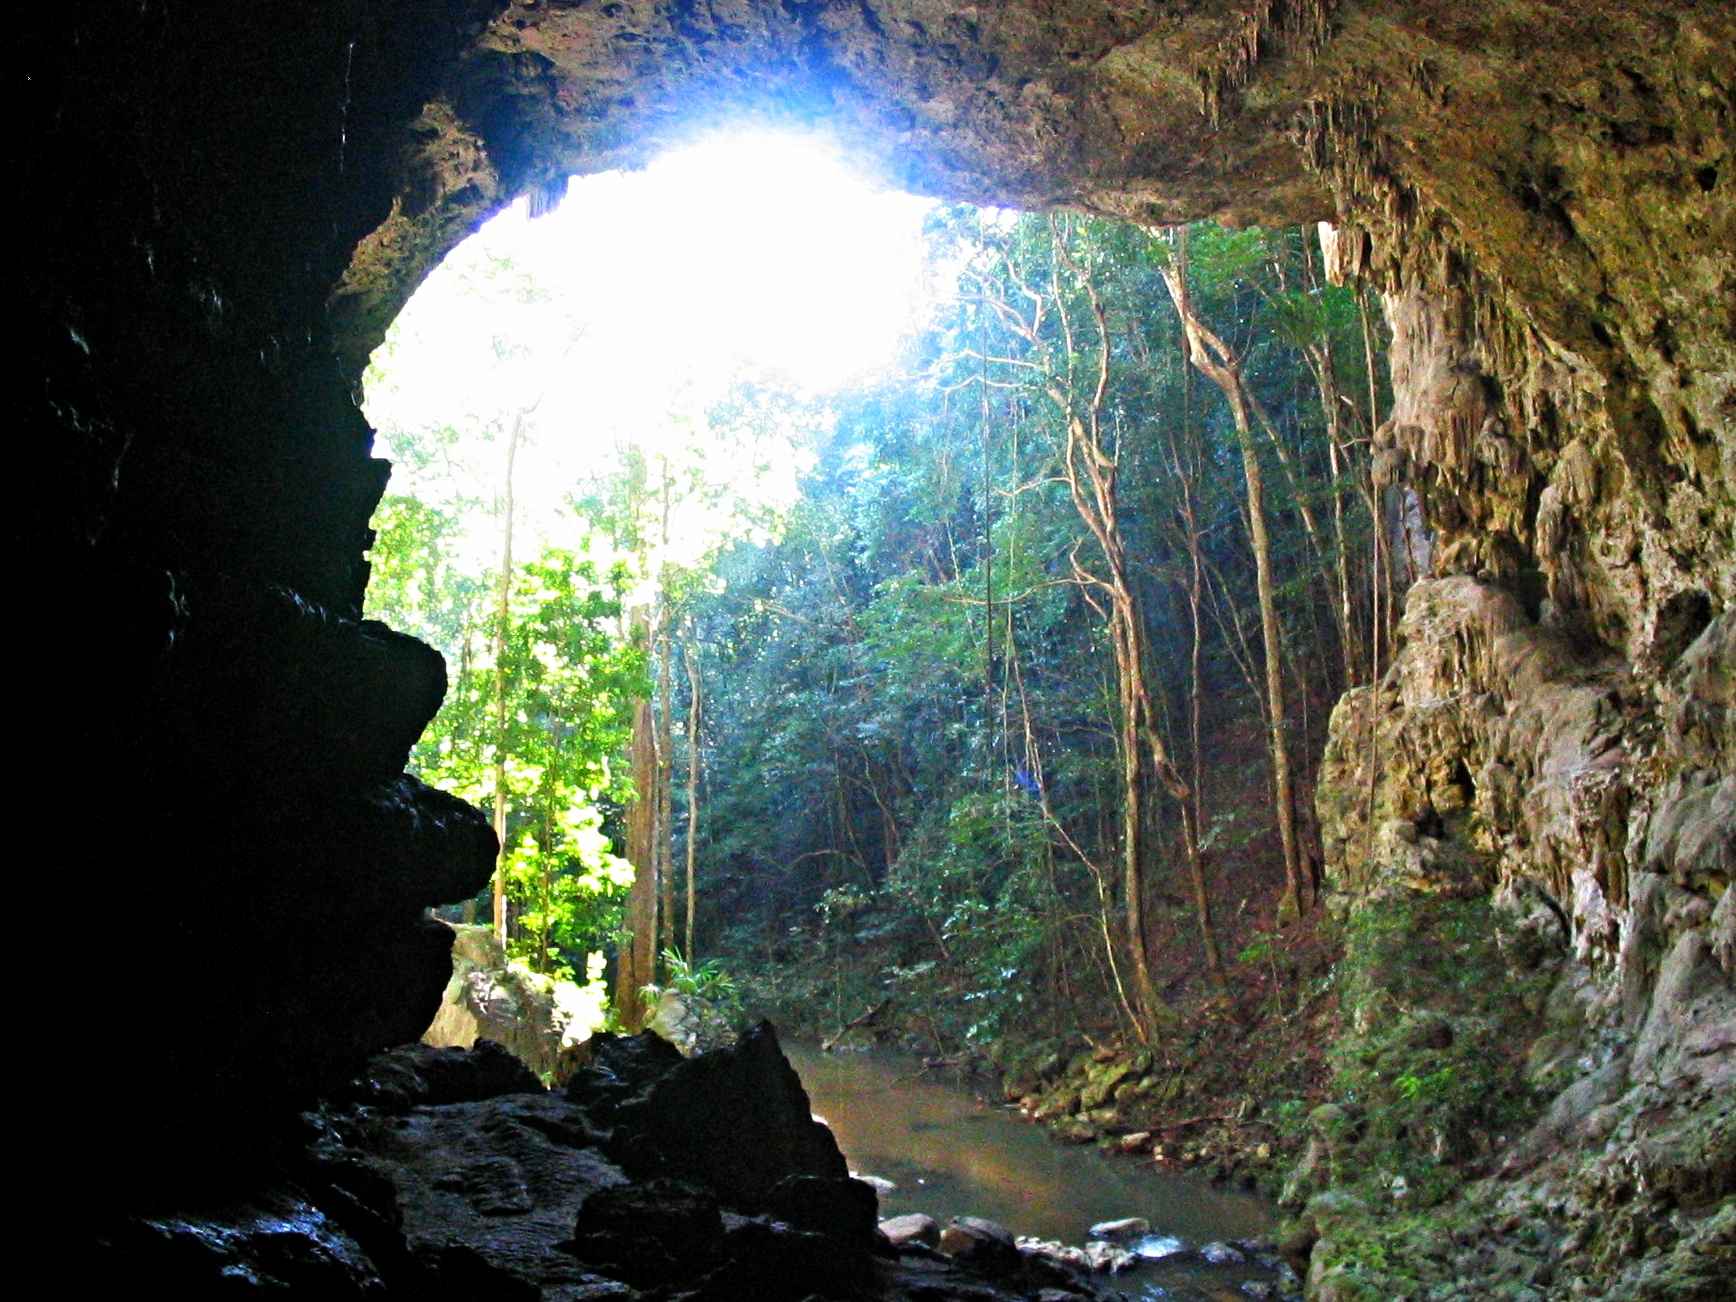 The mouth of the massive Rio Frio Cave in the Mountain Pine Ridge